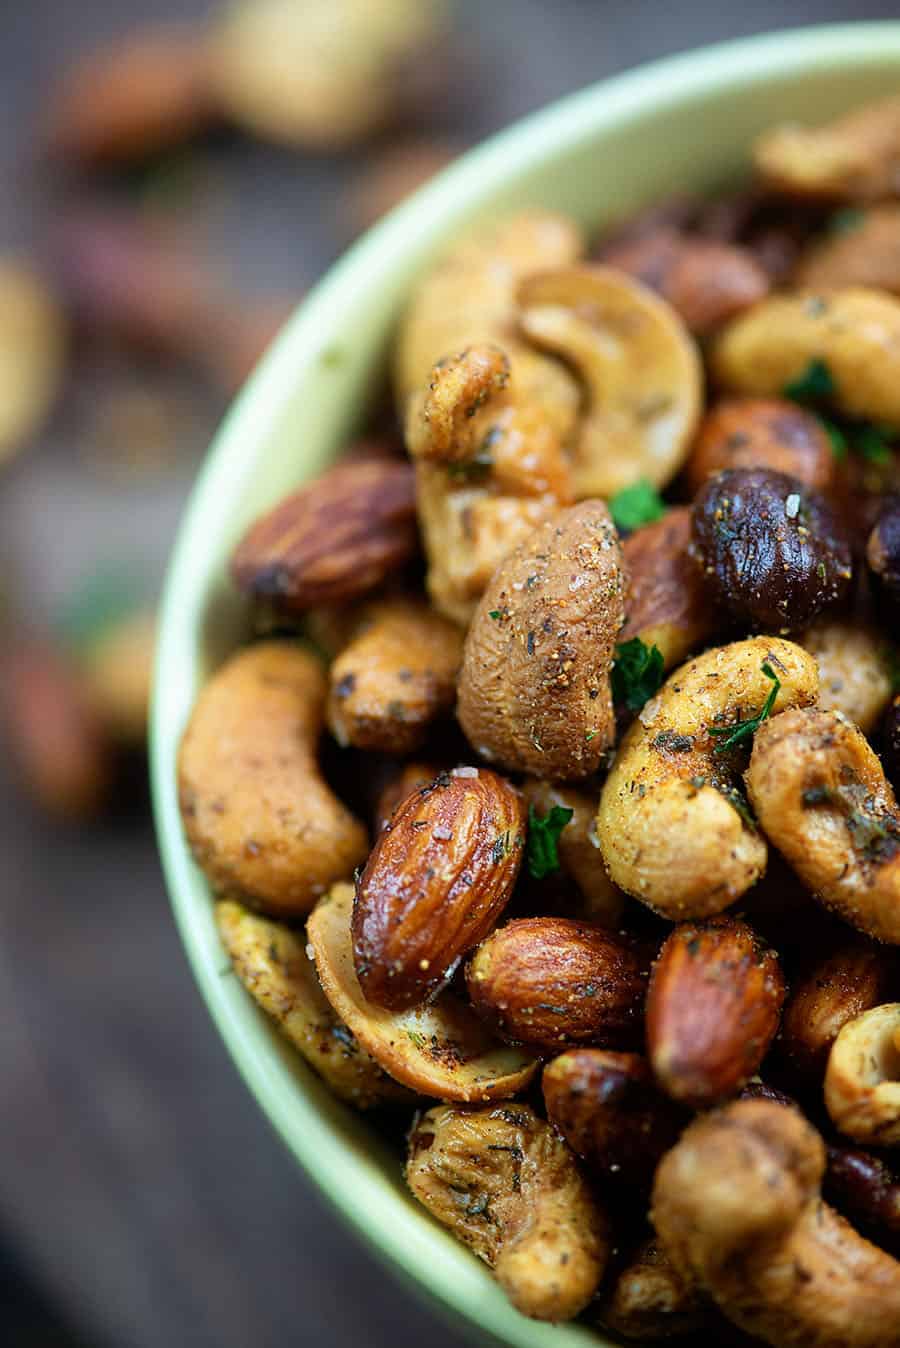 up close view of roasted nuts